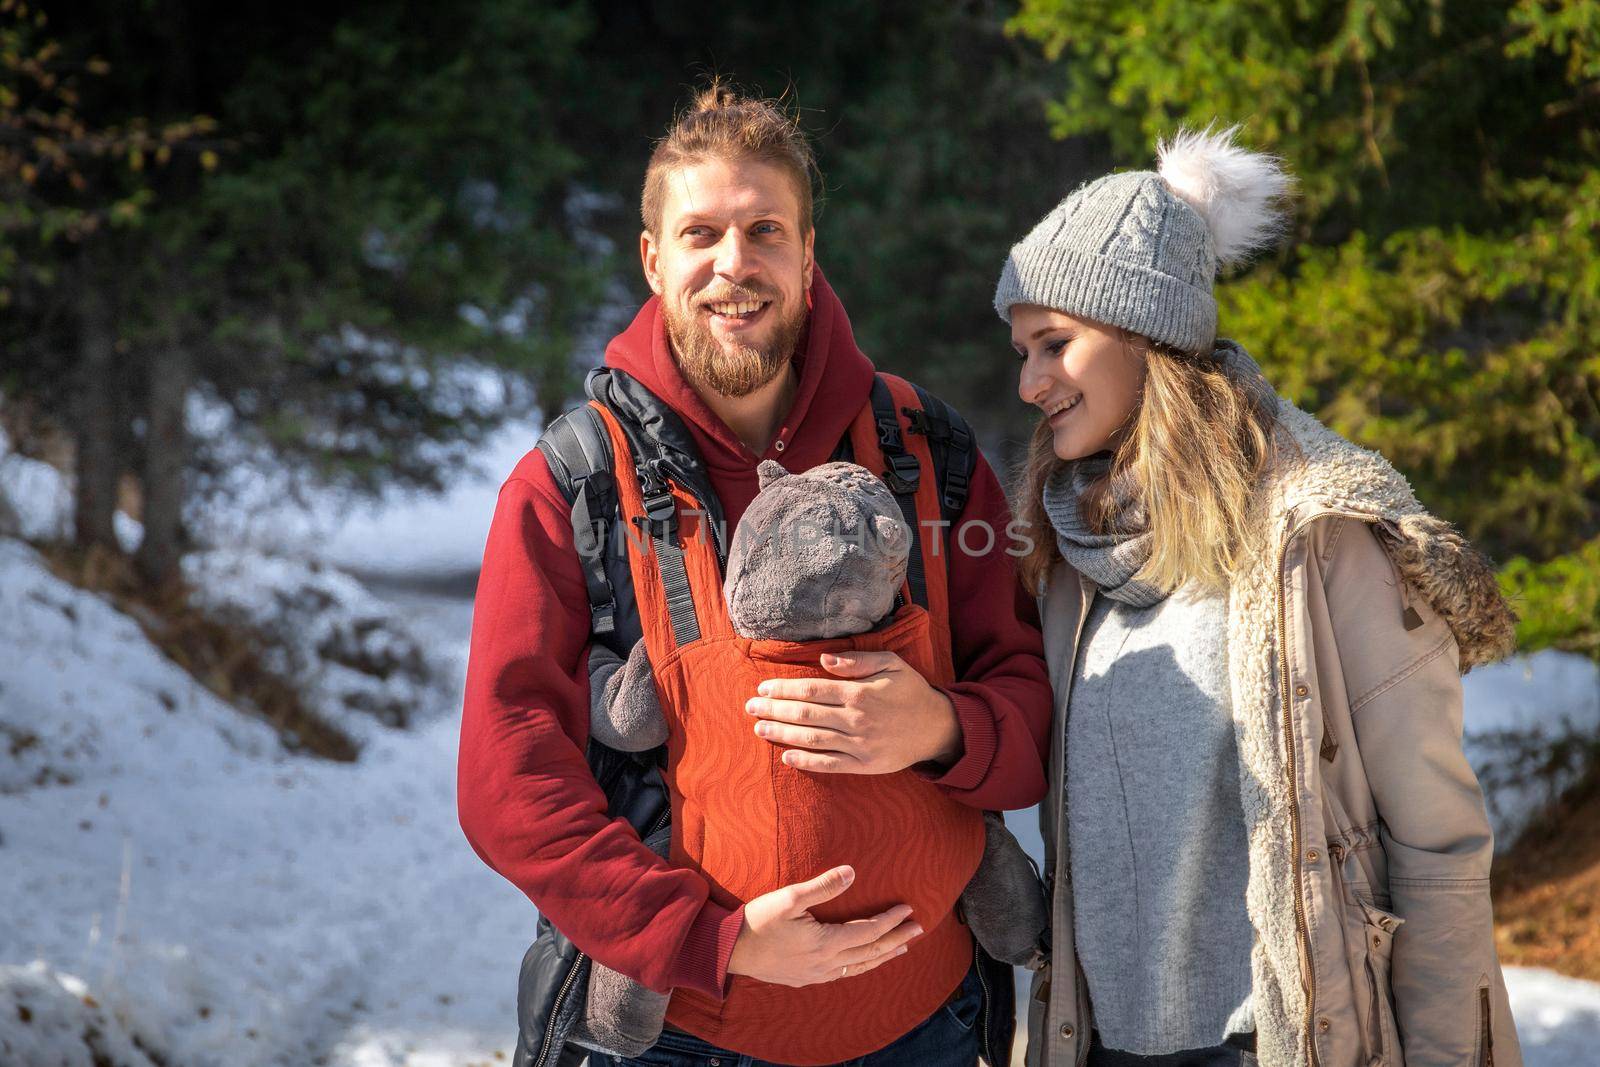 Babywearing winter forest walk with family and their baby son in ergonomic carrier.